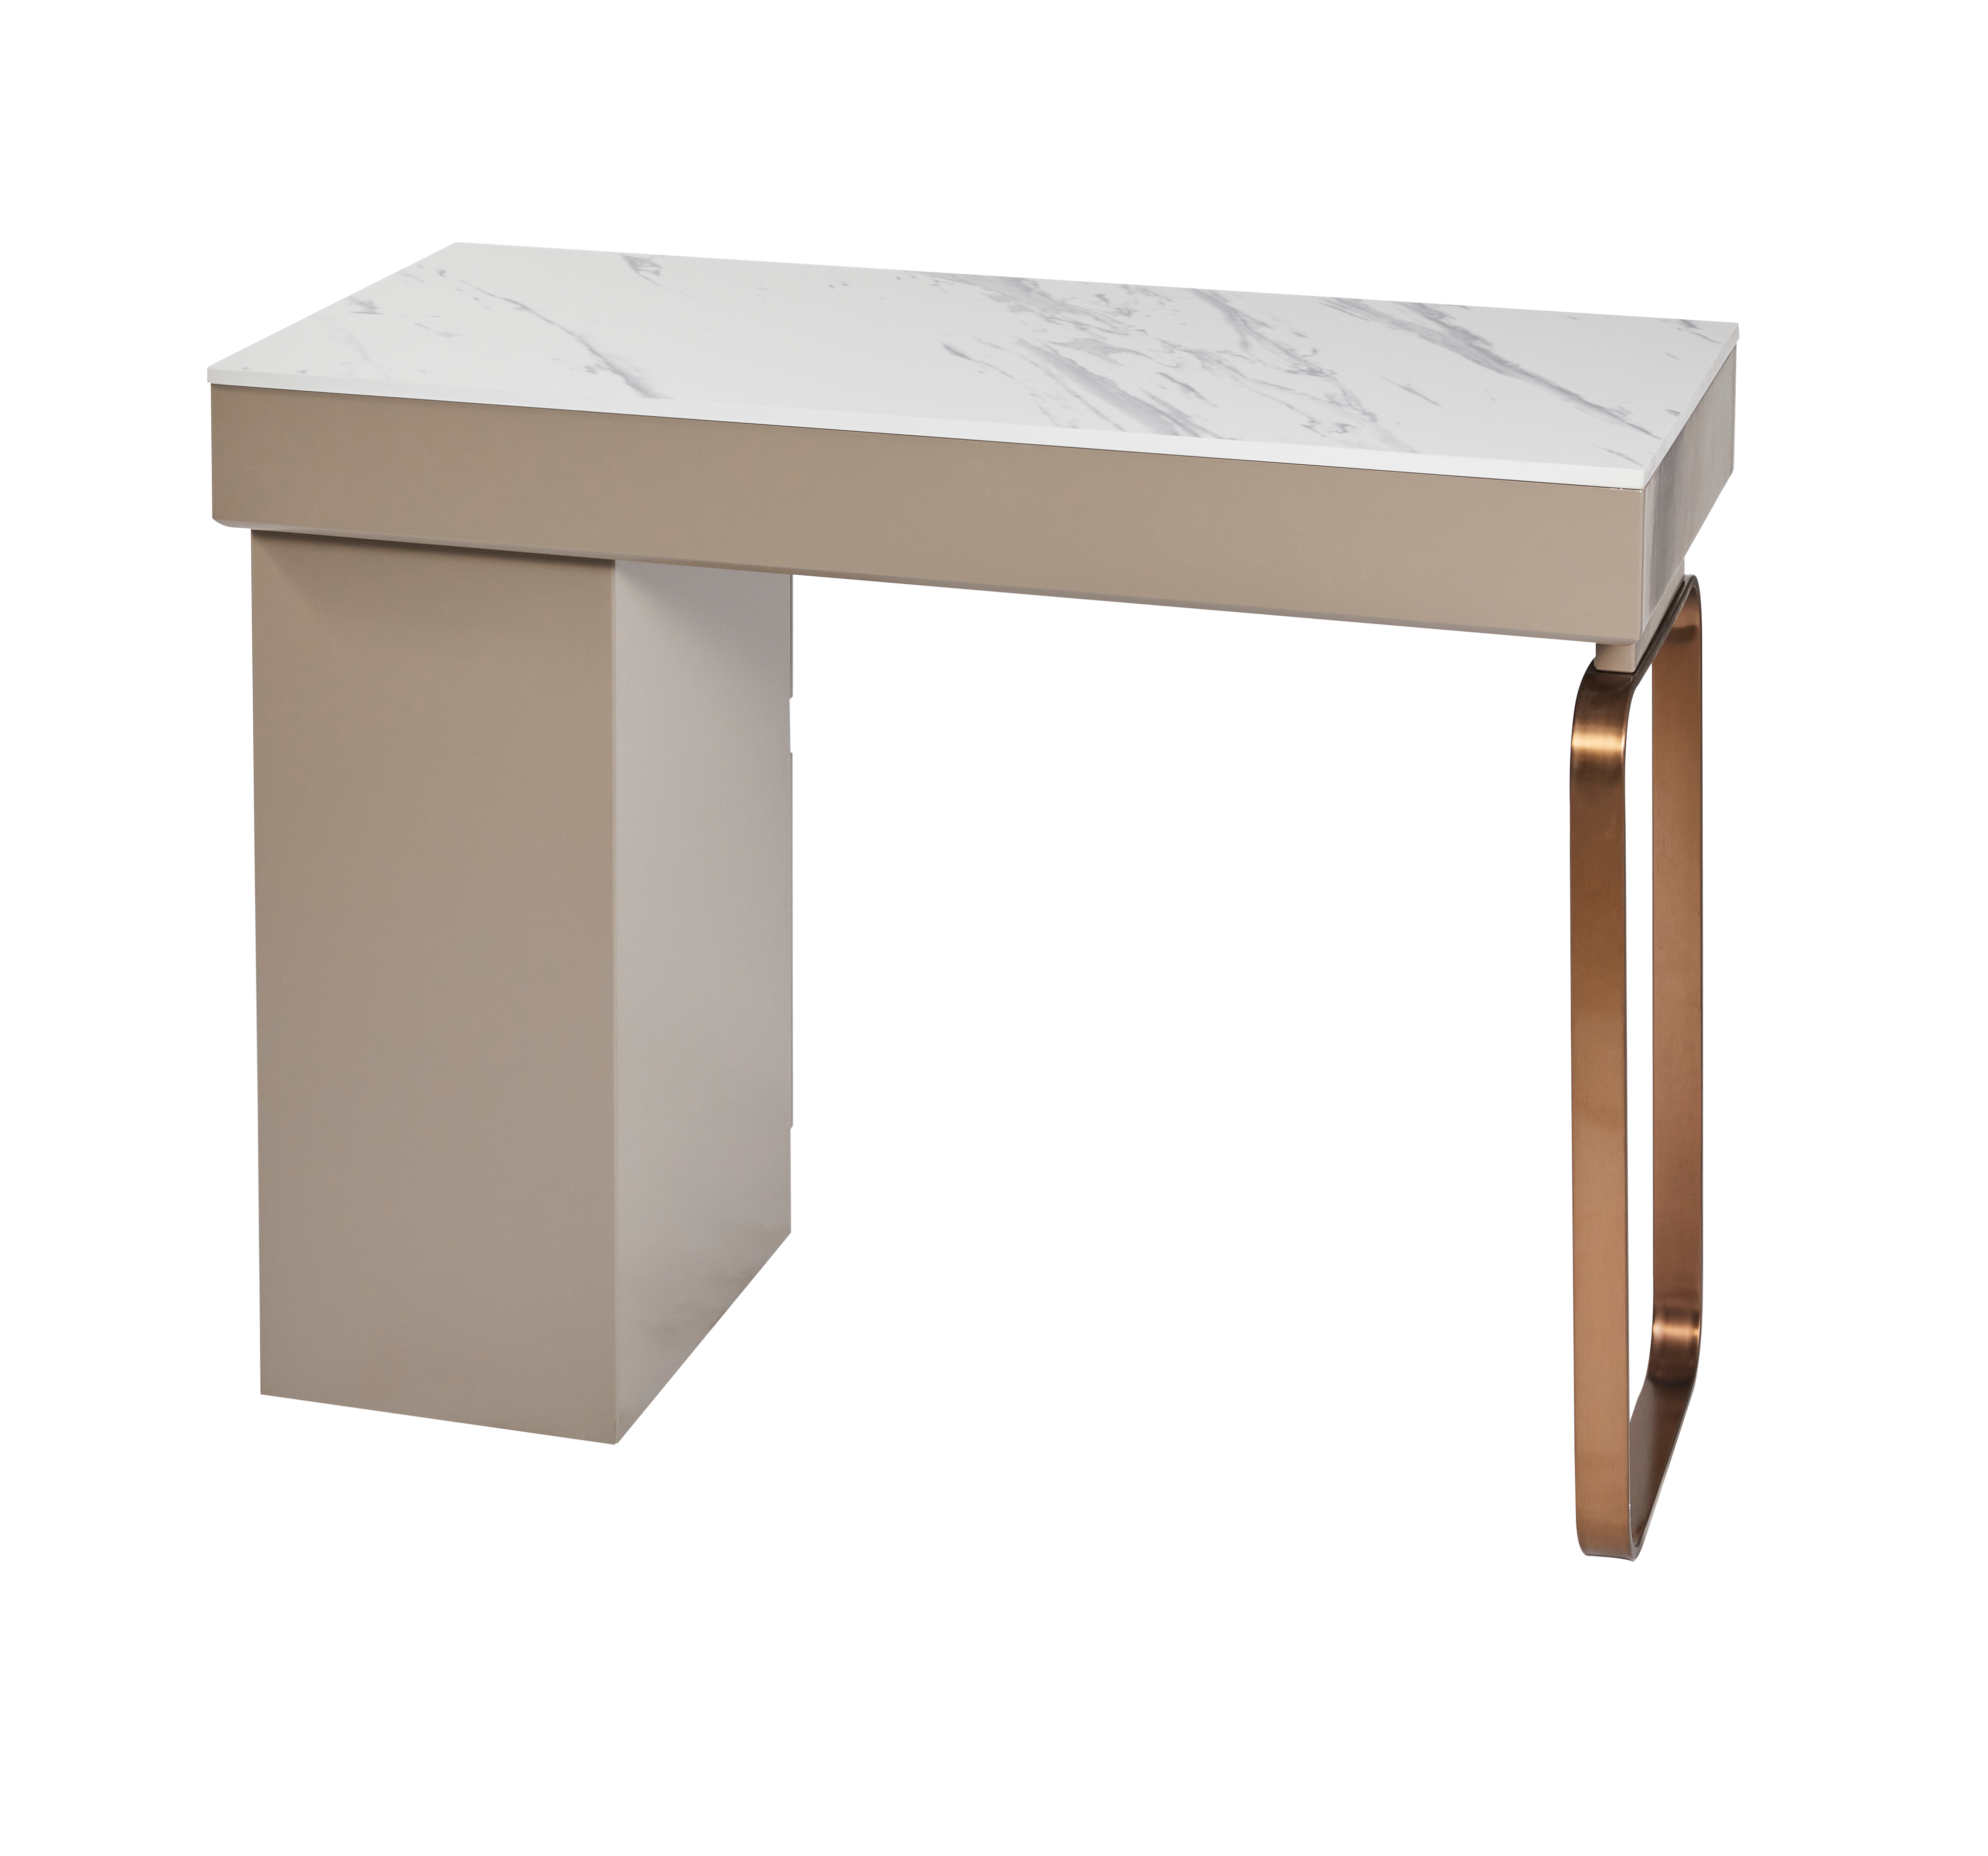 The Maia Nail Desk with White Patterned Stone Top - Copper & Mushroom by SEC